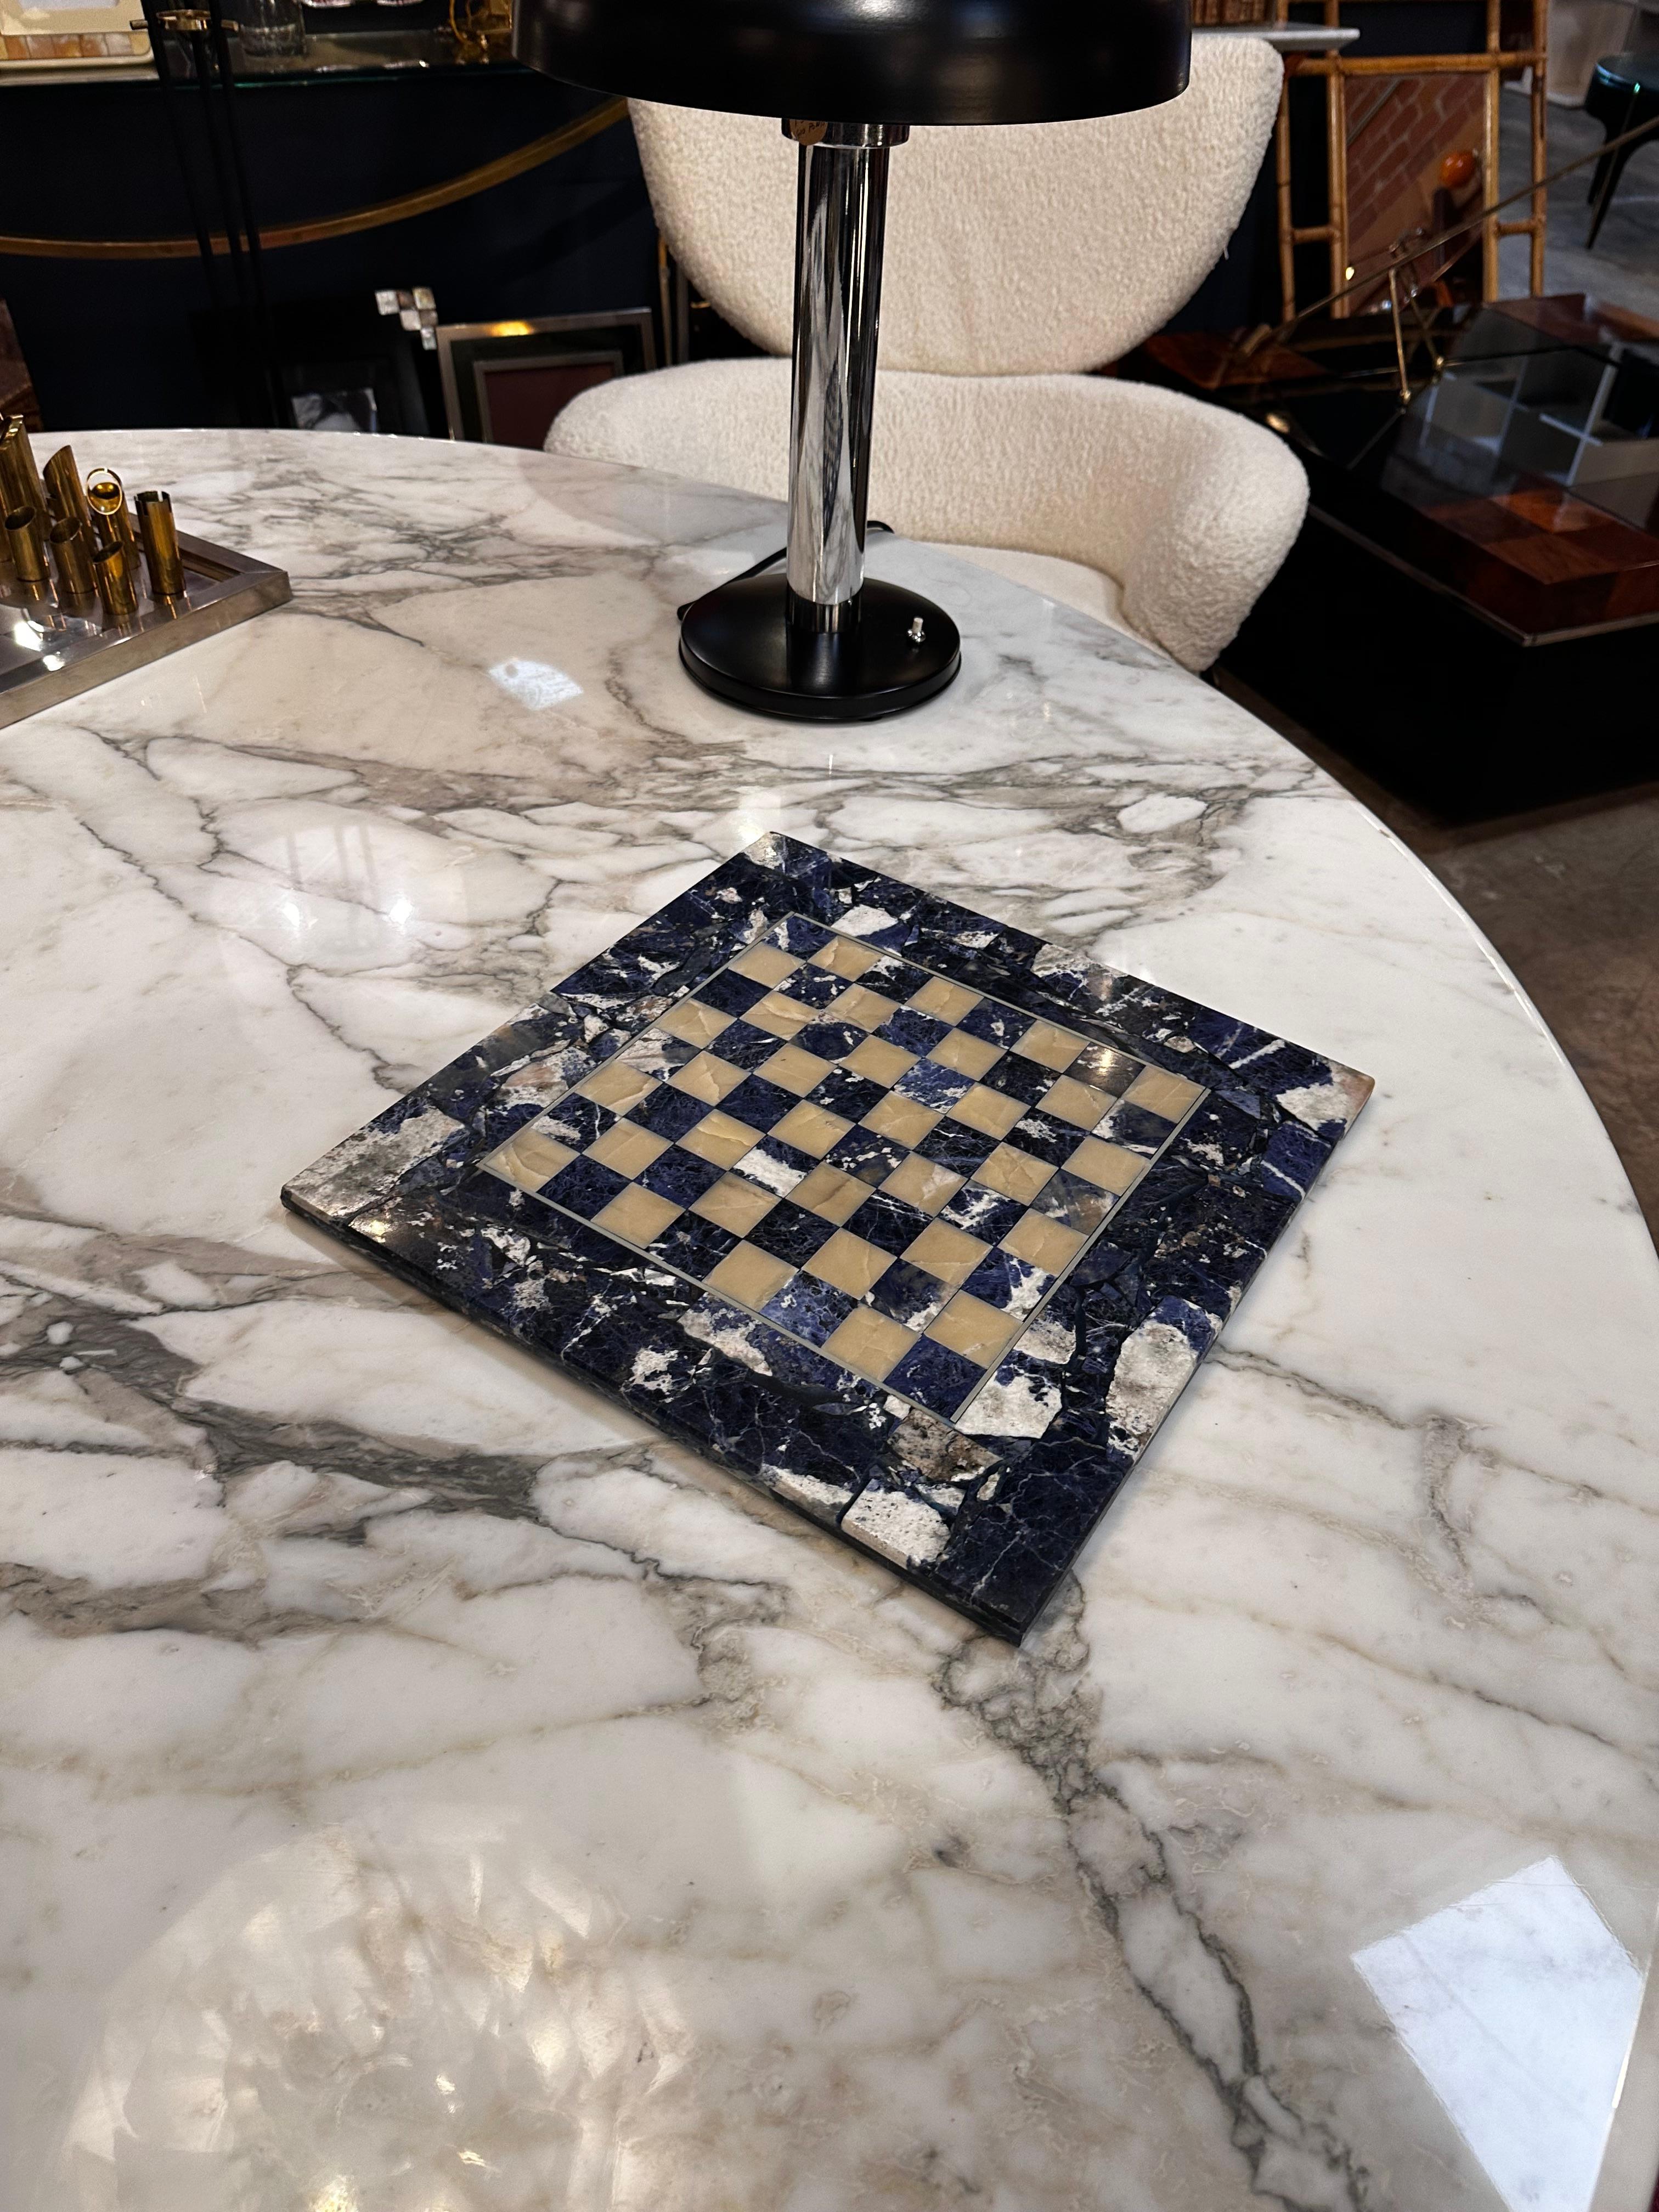 Embark on a journey of opulence with our Vintage Italian Lapis Lazuli Chess Board, a striking piece from the 1980s. This exquisite chess board, meticulously crafted in Italy, showcases the timeless beauty of lapiz lazuli. The deep blue hues and